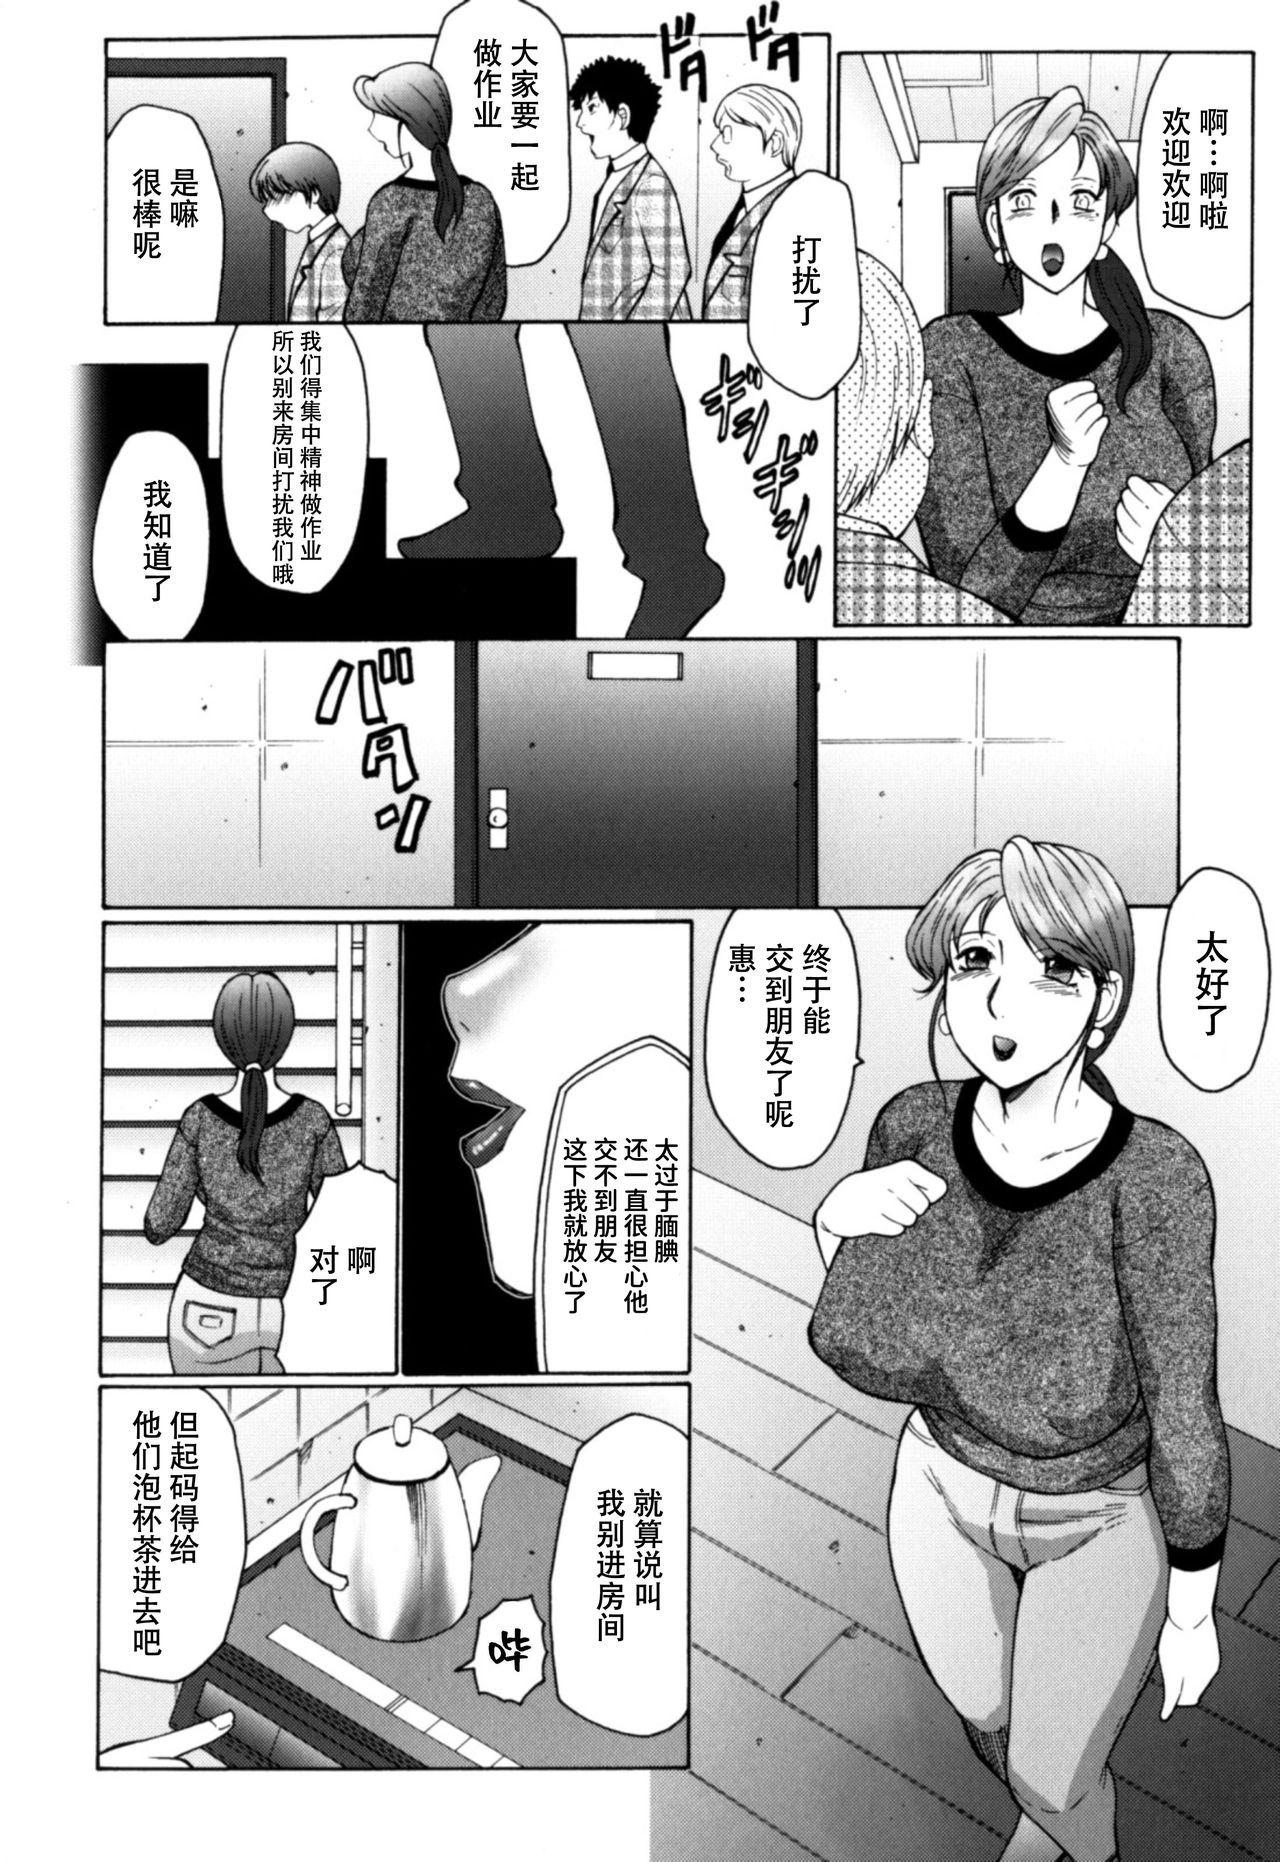 Amatures Gone Wild [Fuusen Club] Haha Mamire Ch. 1 [Chinese]【不可视汉化】 Tongue - Page 5